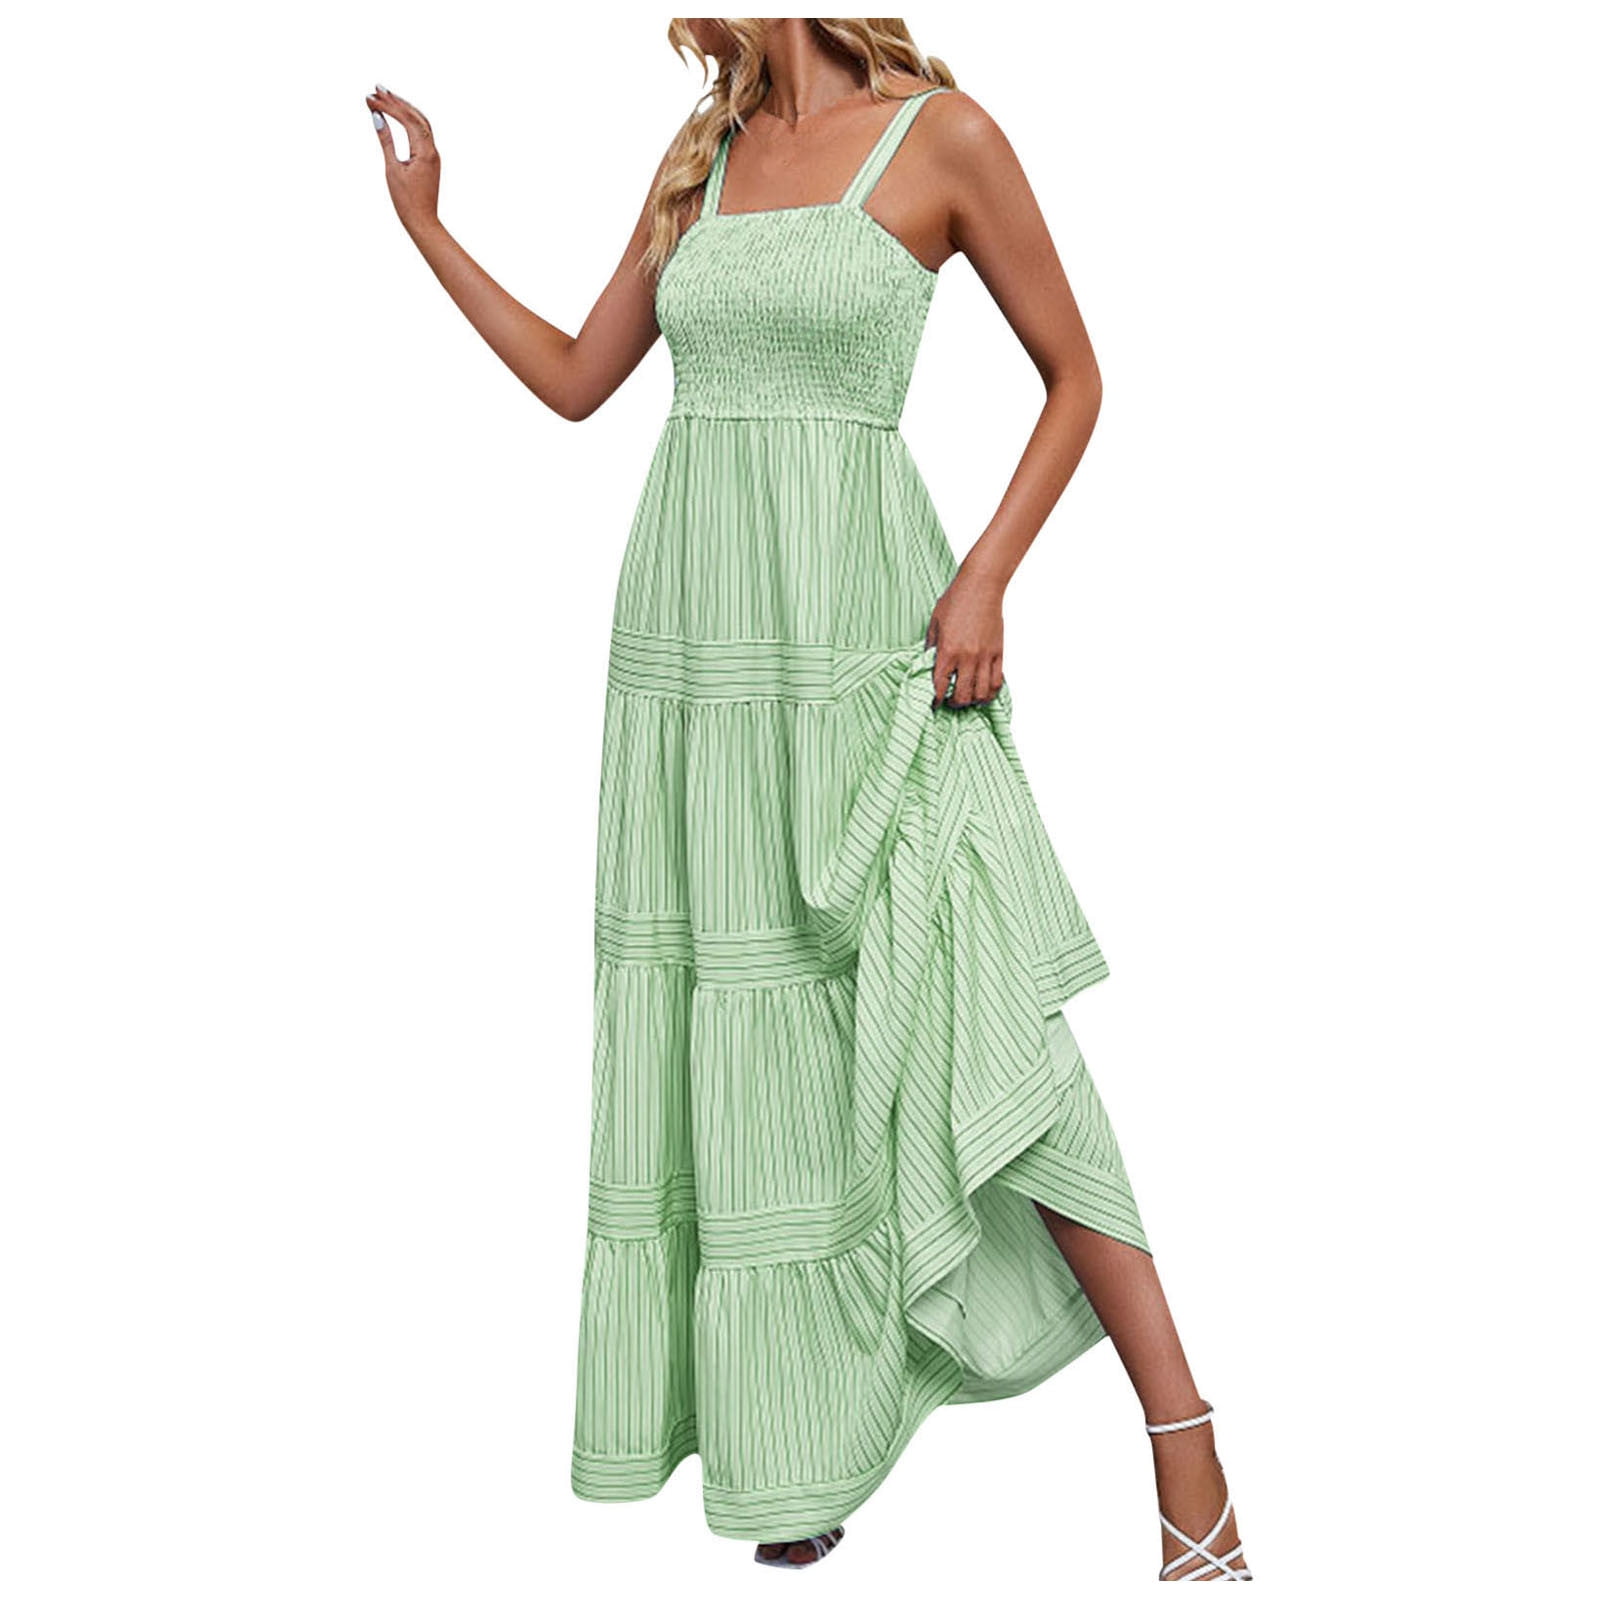 Leisure Dress for Ladies Women Casual Holiday Bohemian Long Dress ...